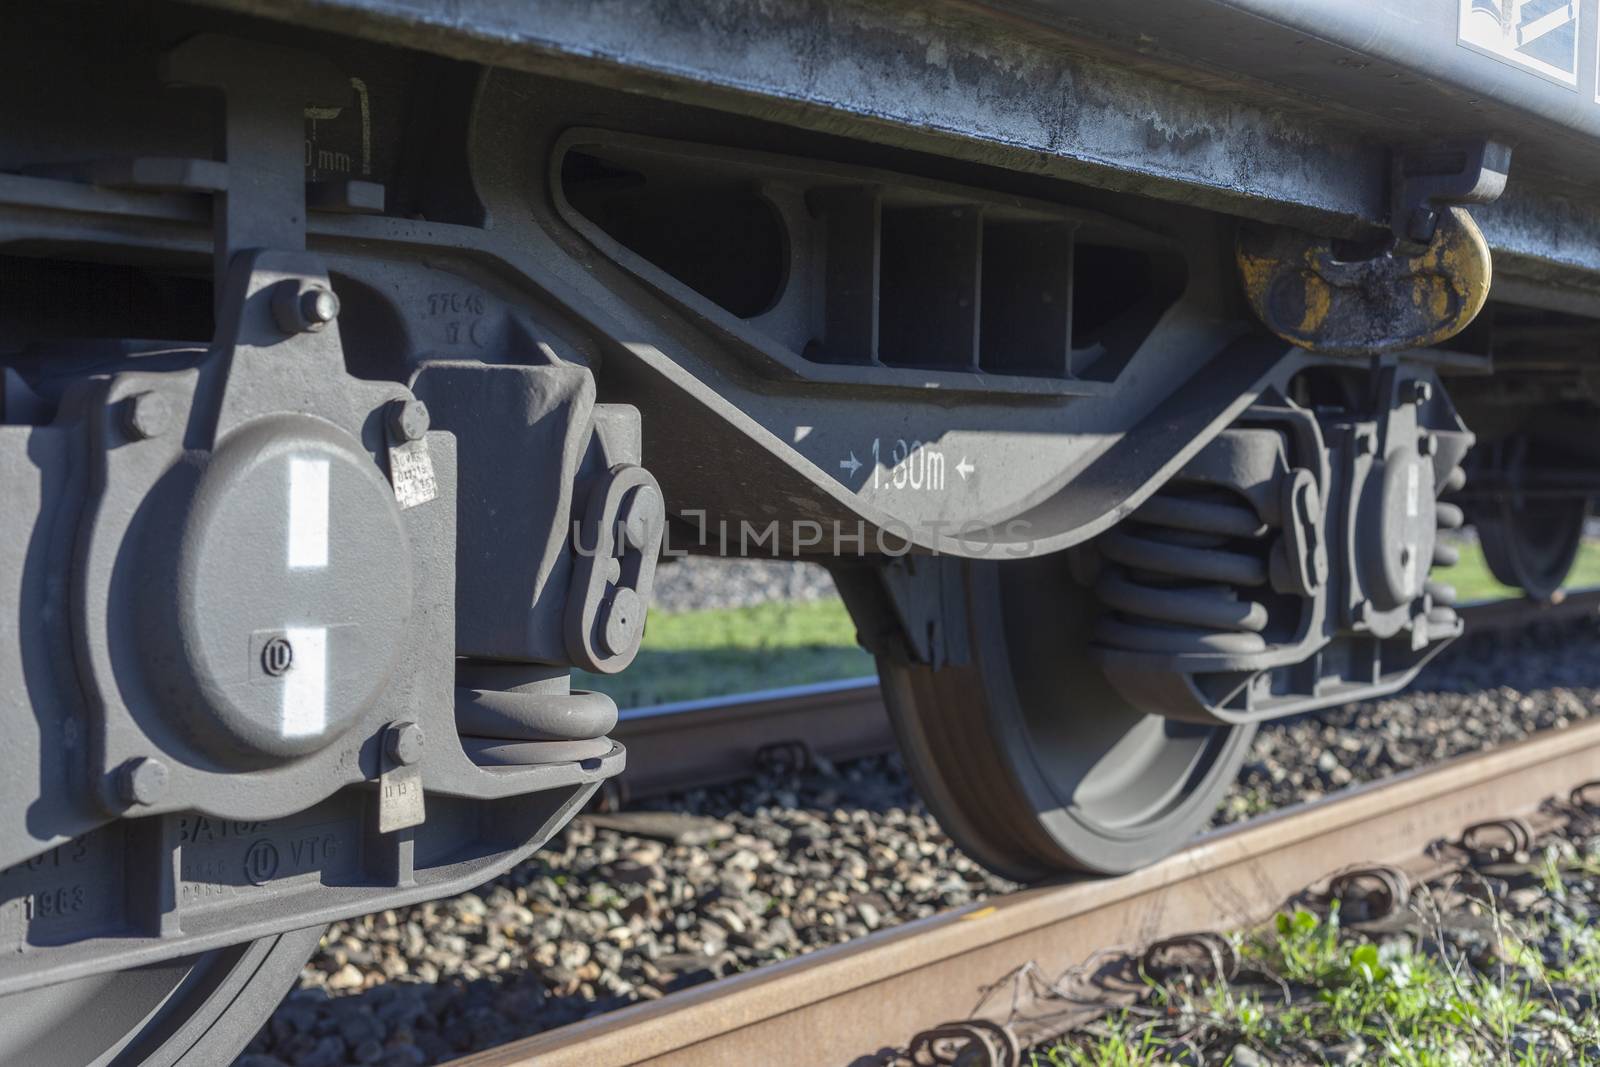 A closeup view of the wheels of a train near the port of rotterdam